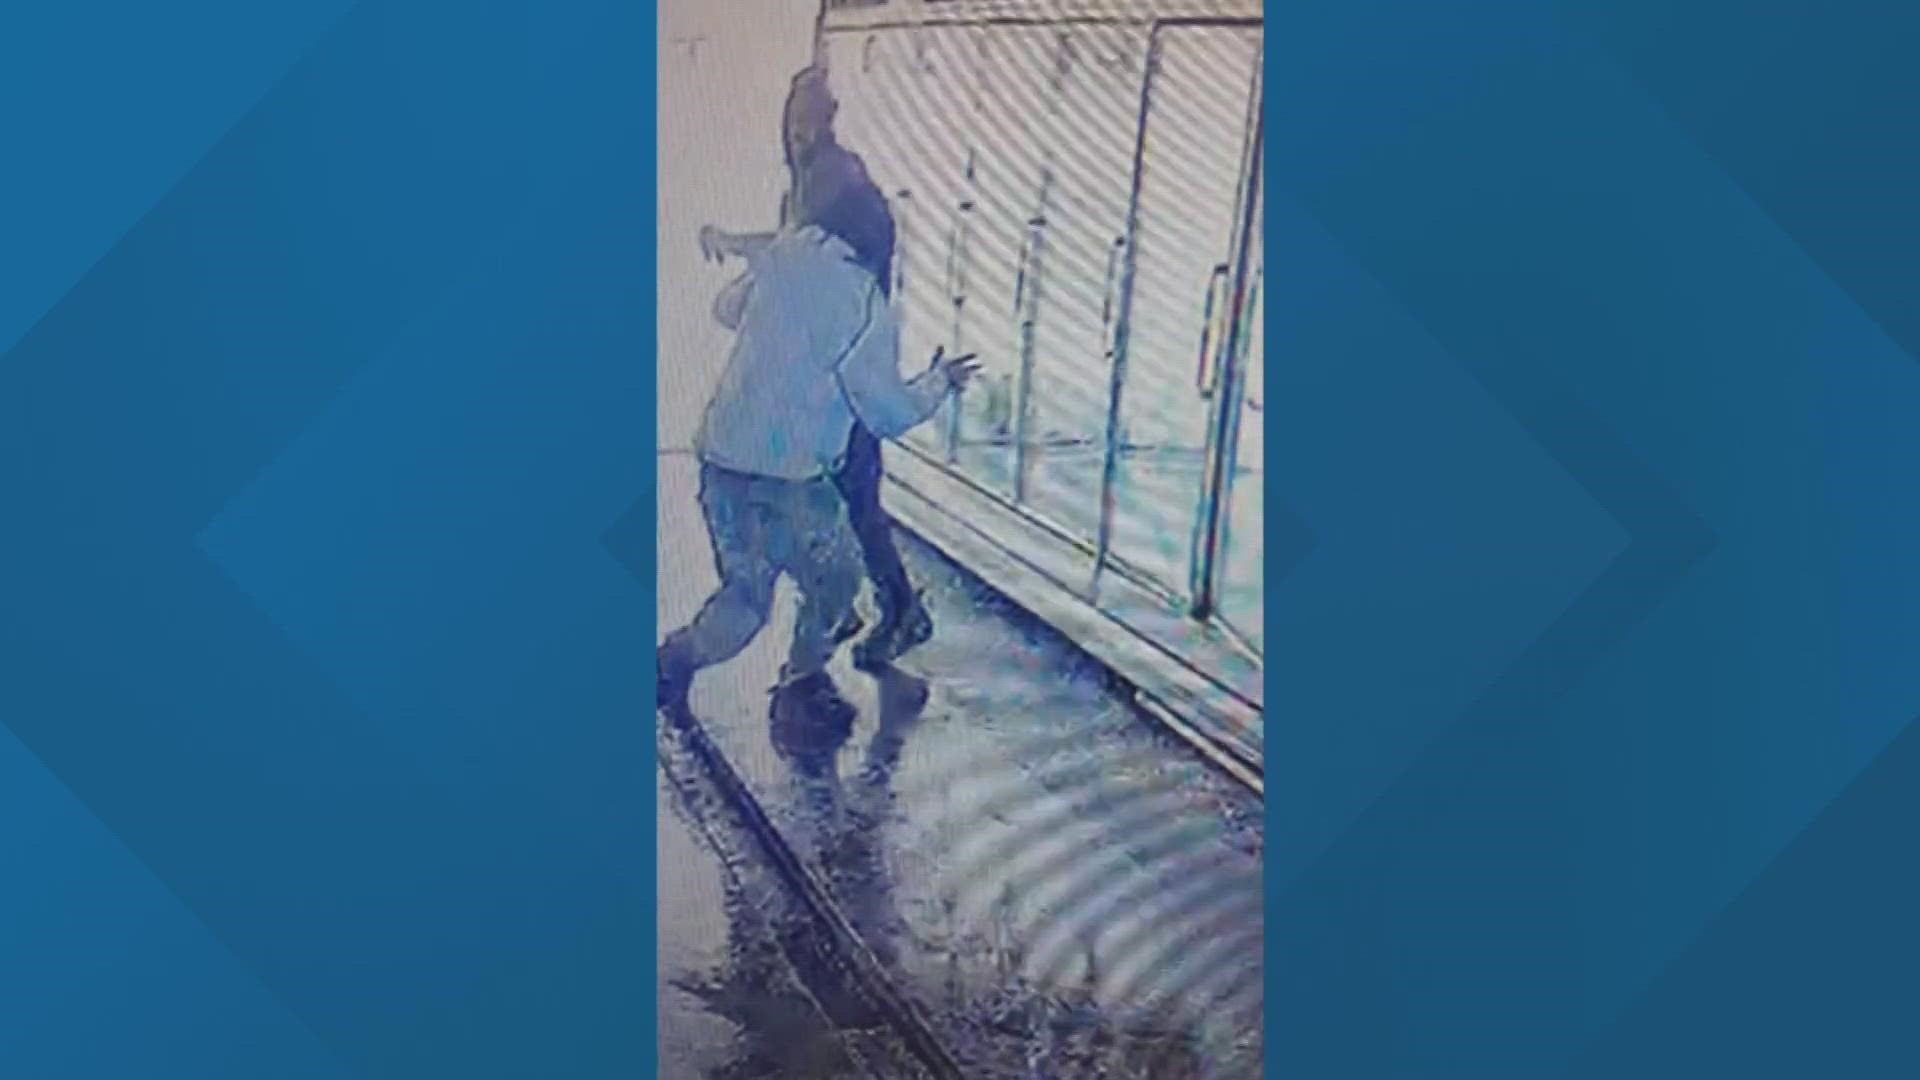 According to police, on Jan. 22 a man was approached in the cooler bay of a carryout store in the 1500 block of Frebis Avenue by two suspects.